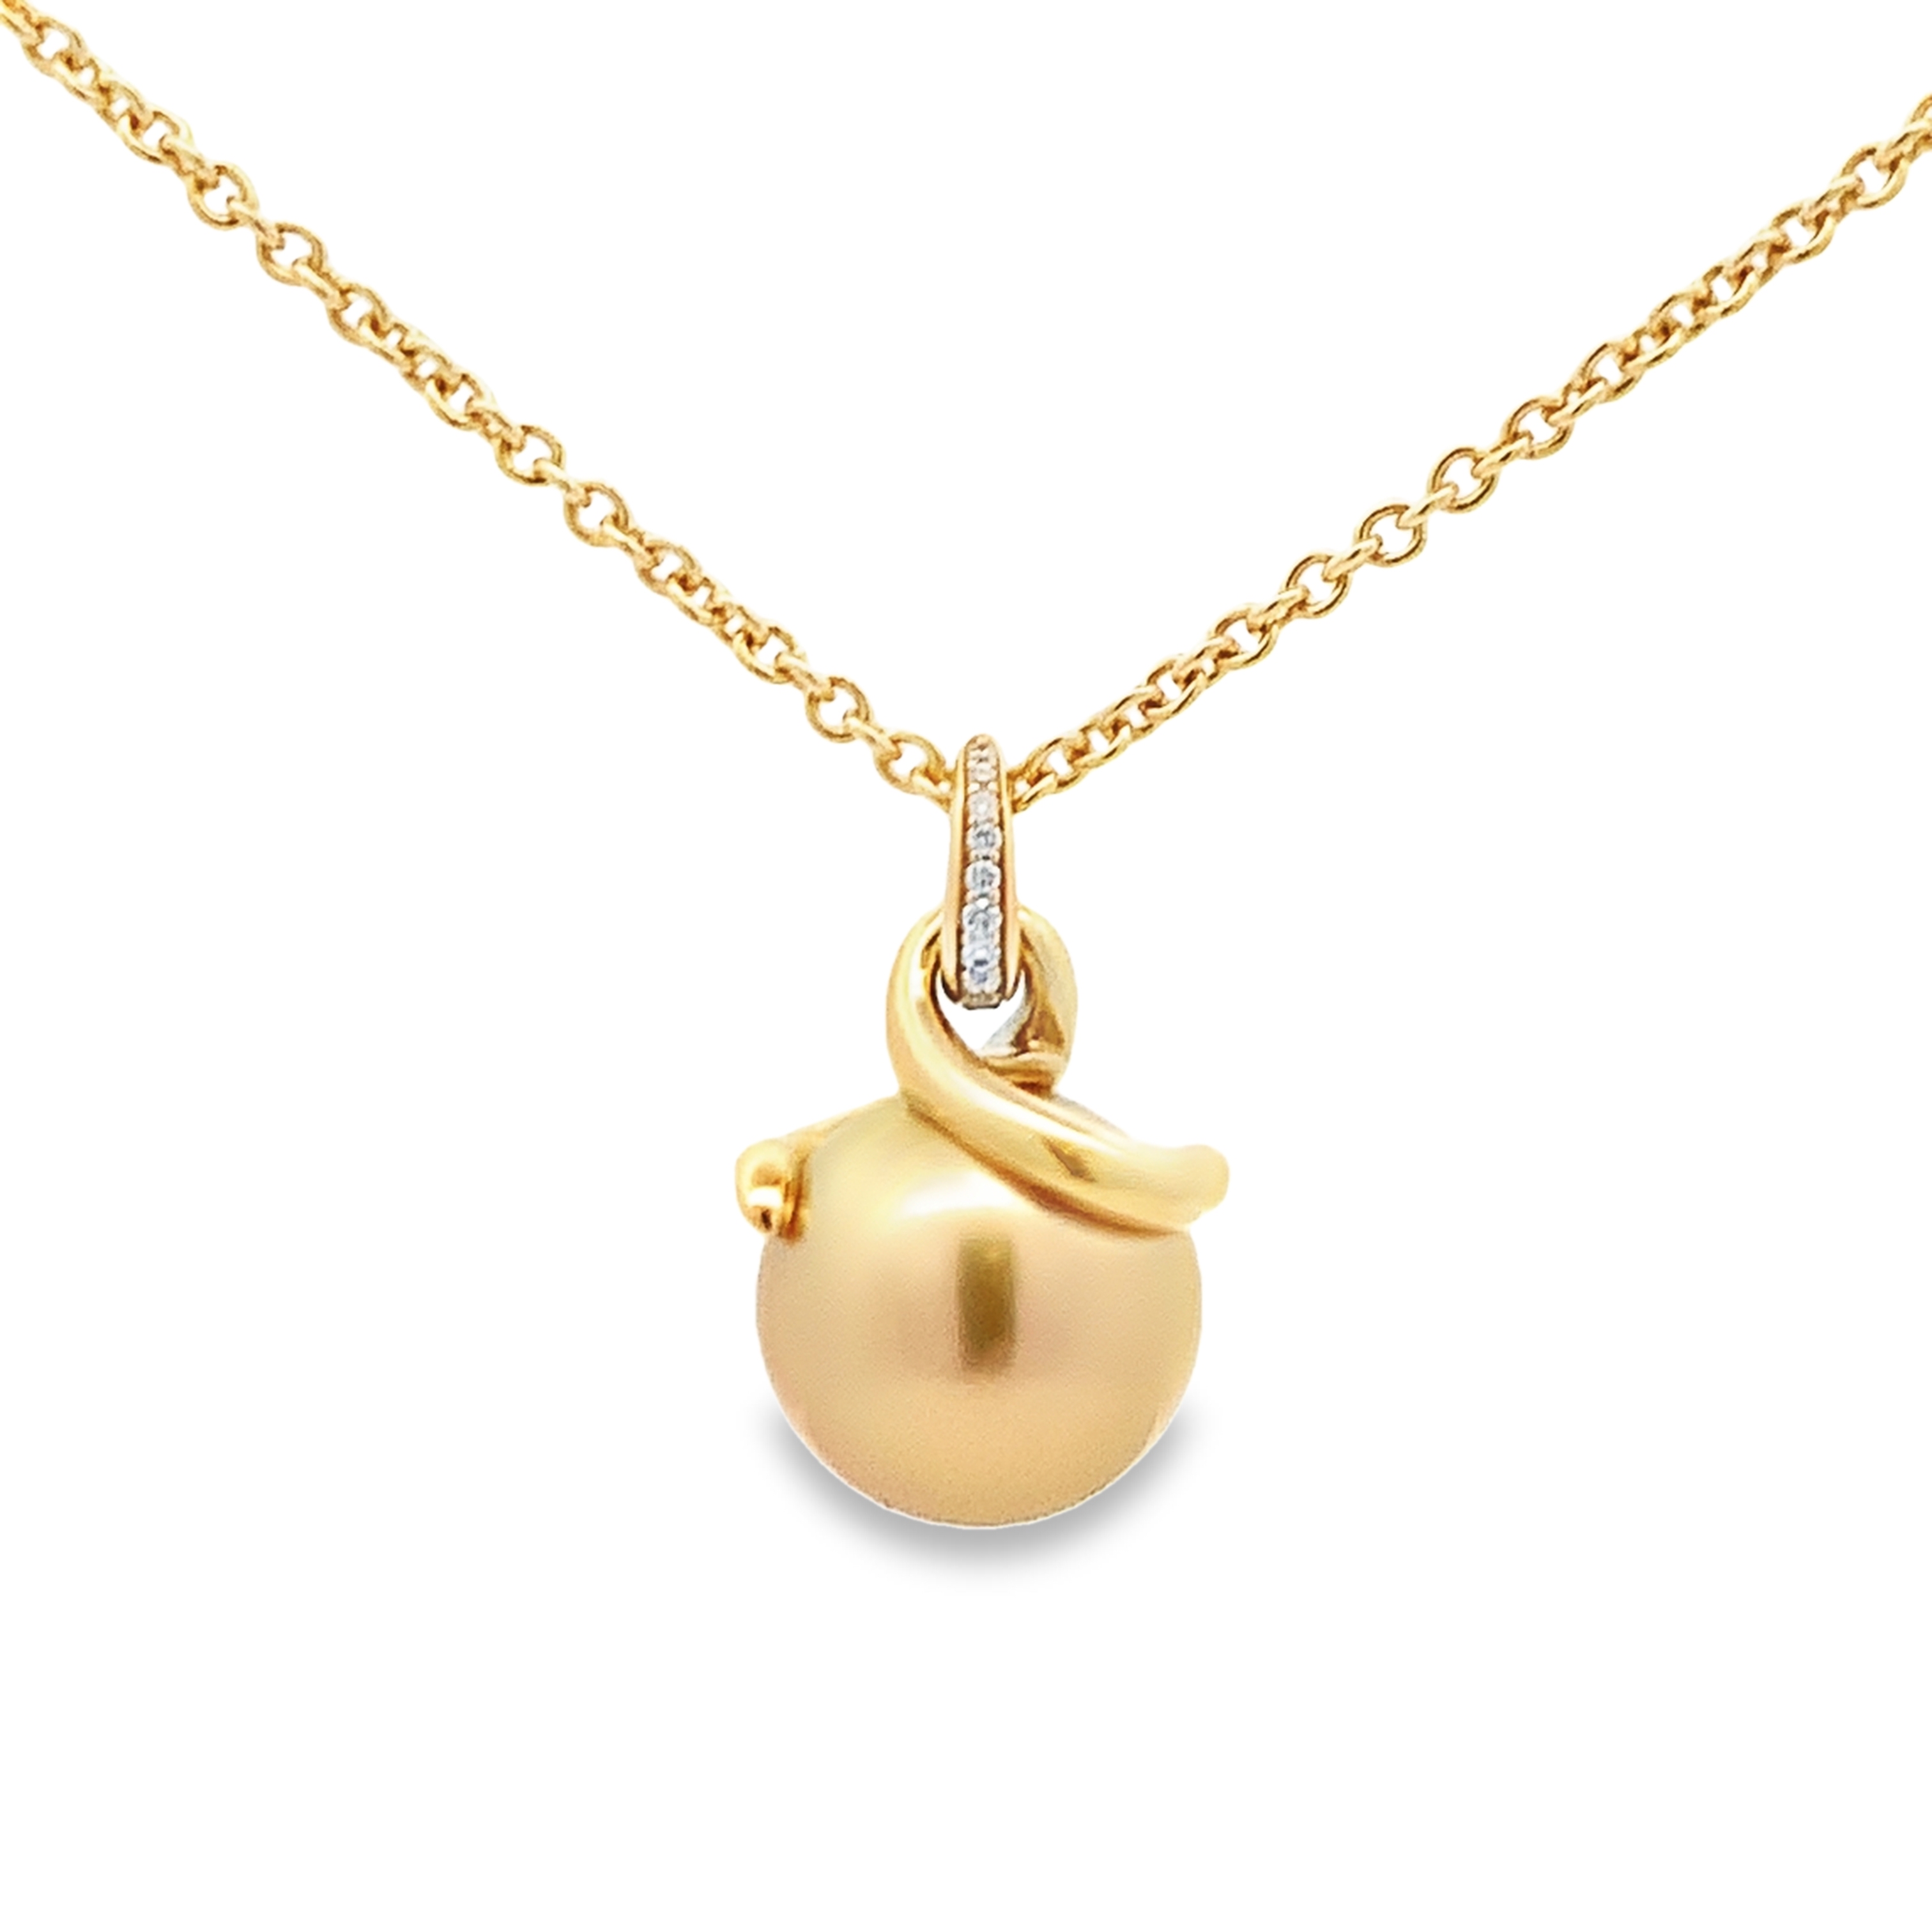 Mikimoto 18K Yellow Gold Golden South Sea Pearl Pendant Necklace